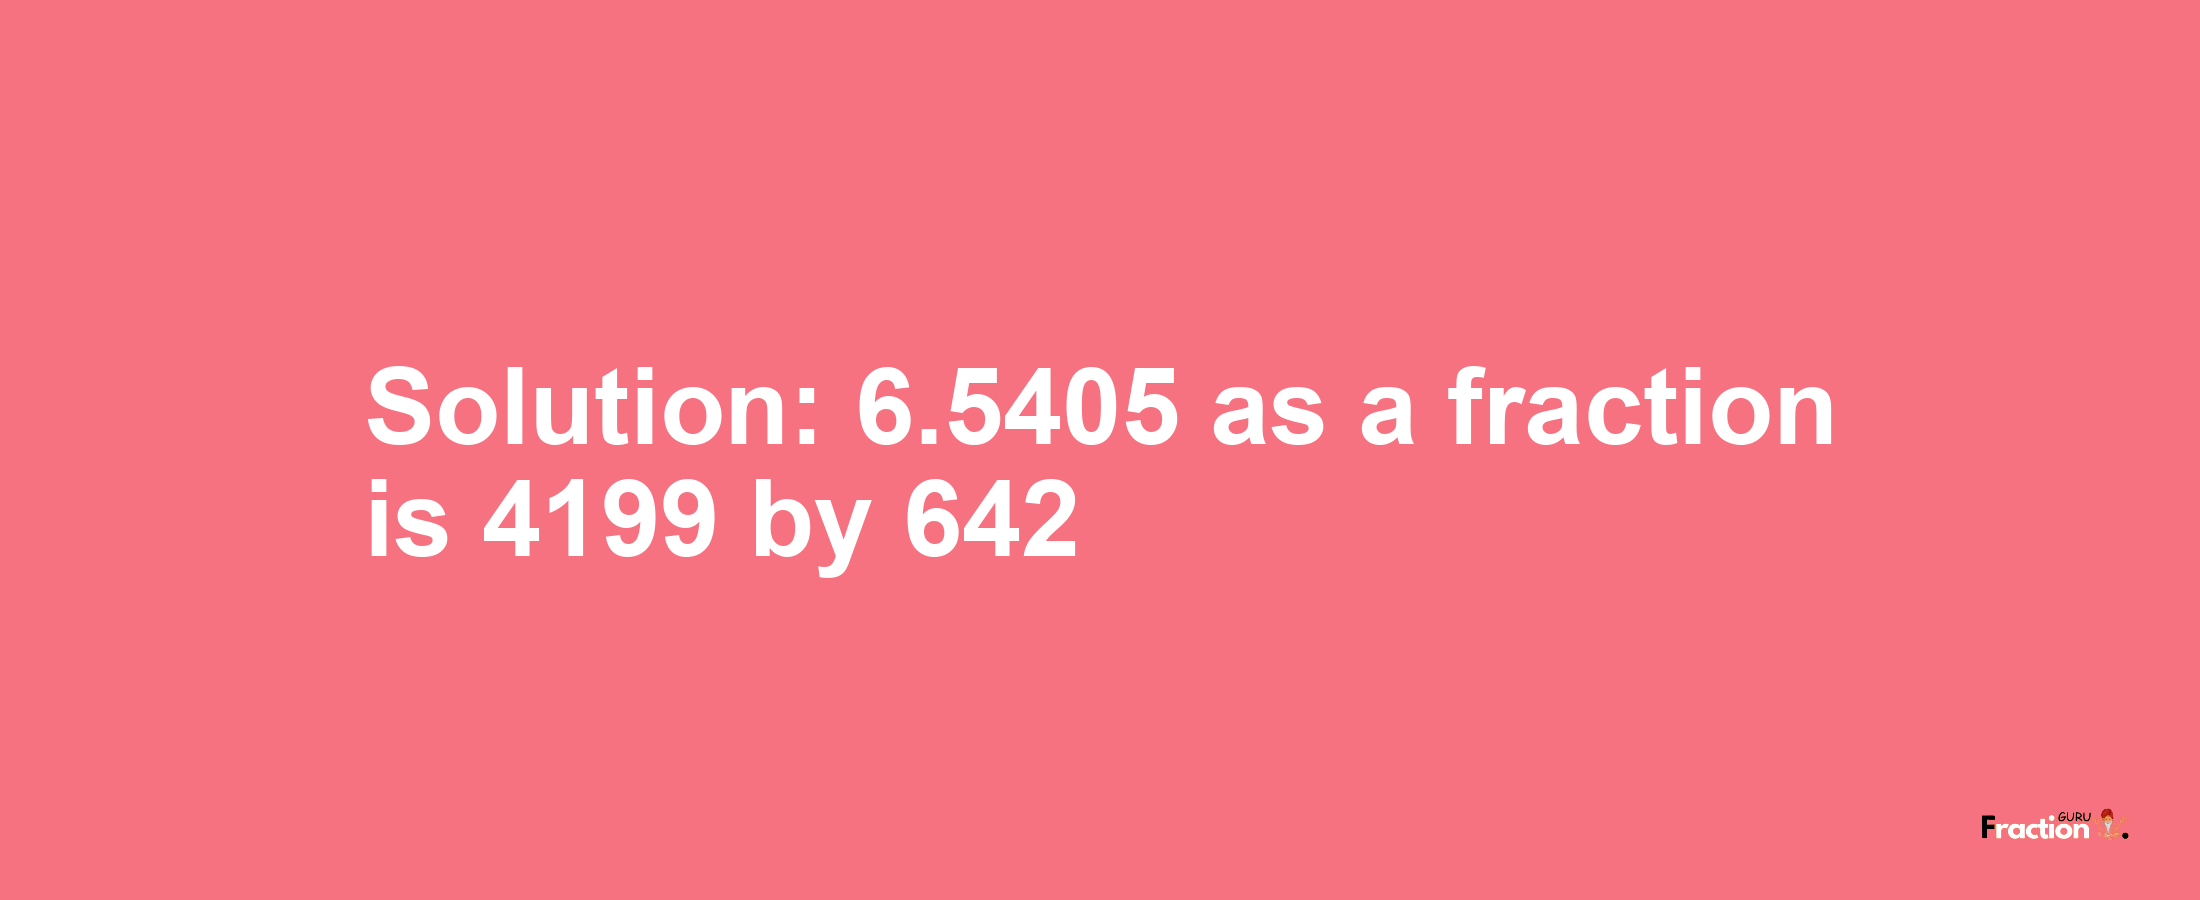 Solution:6.5405 as a fraction is 4199/642